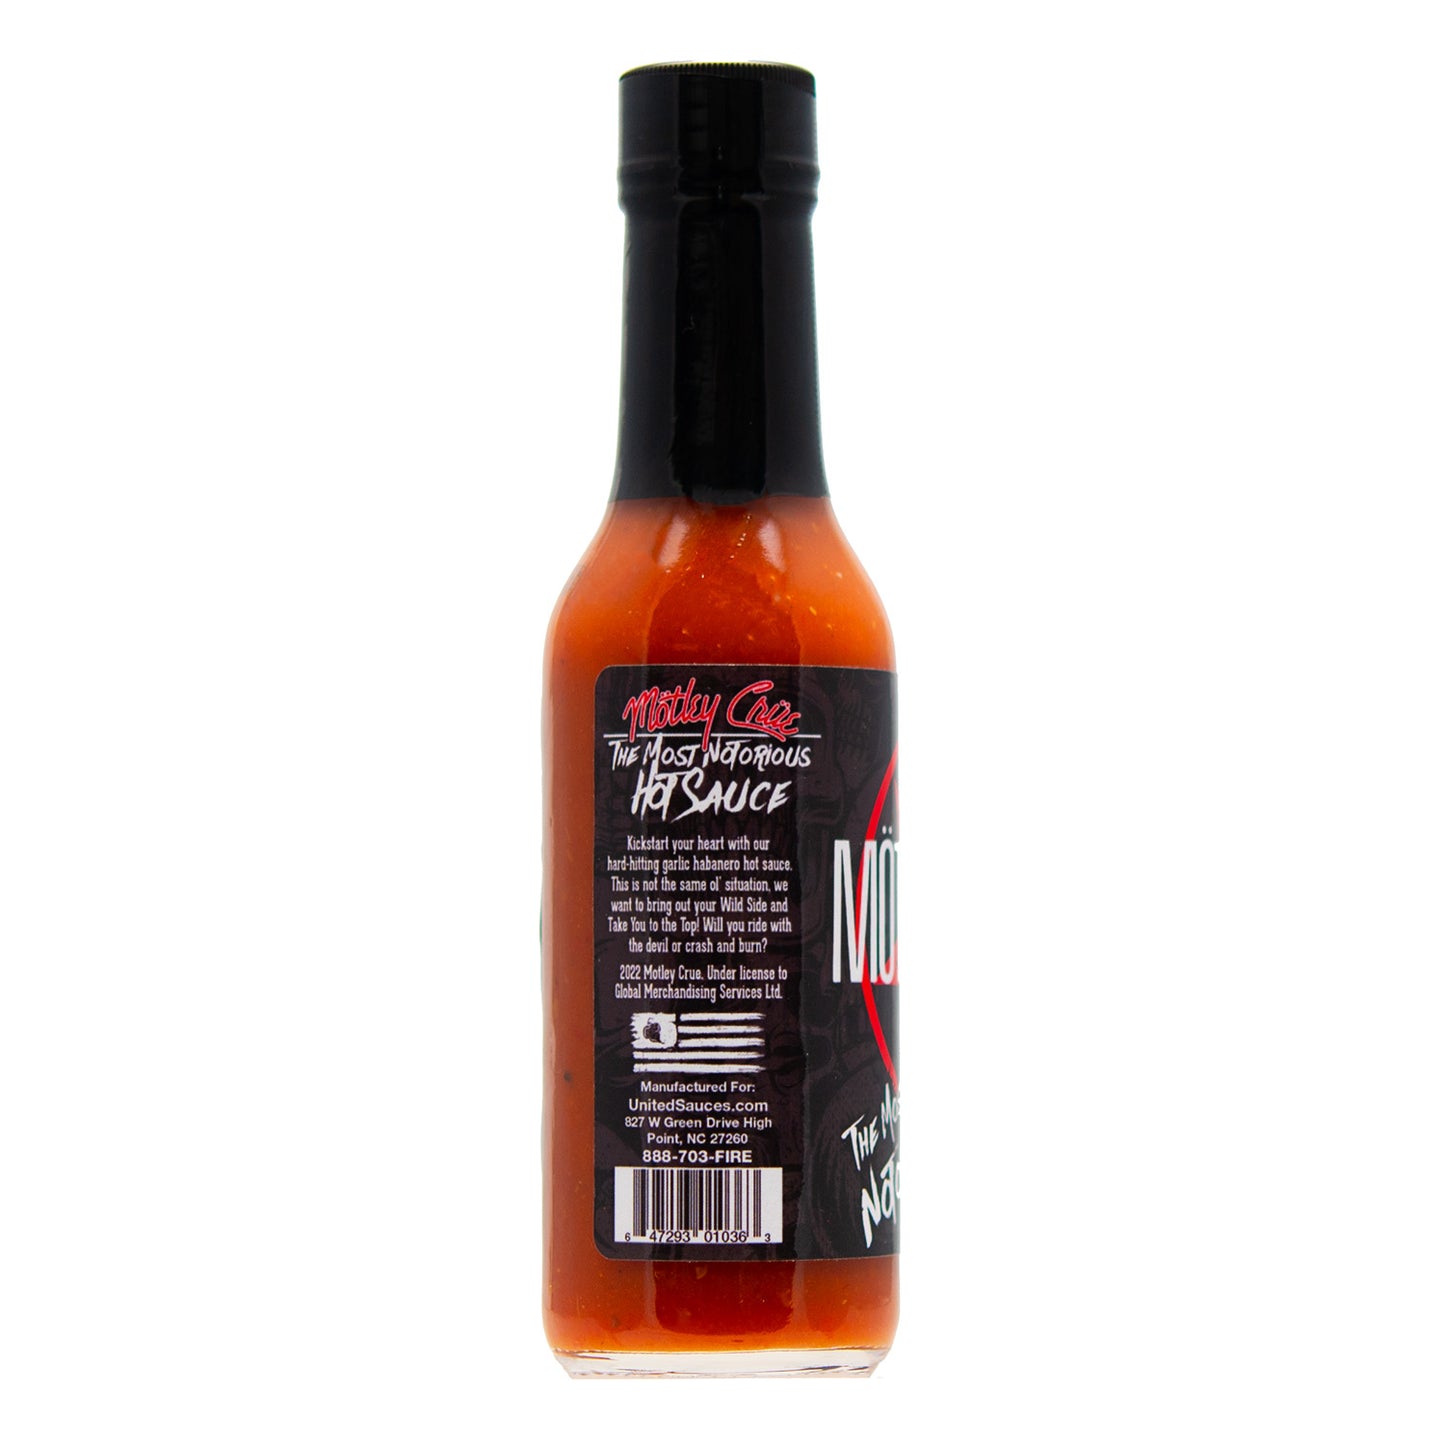 Mötley Crüe The Most Notorious Hot Sauce